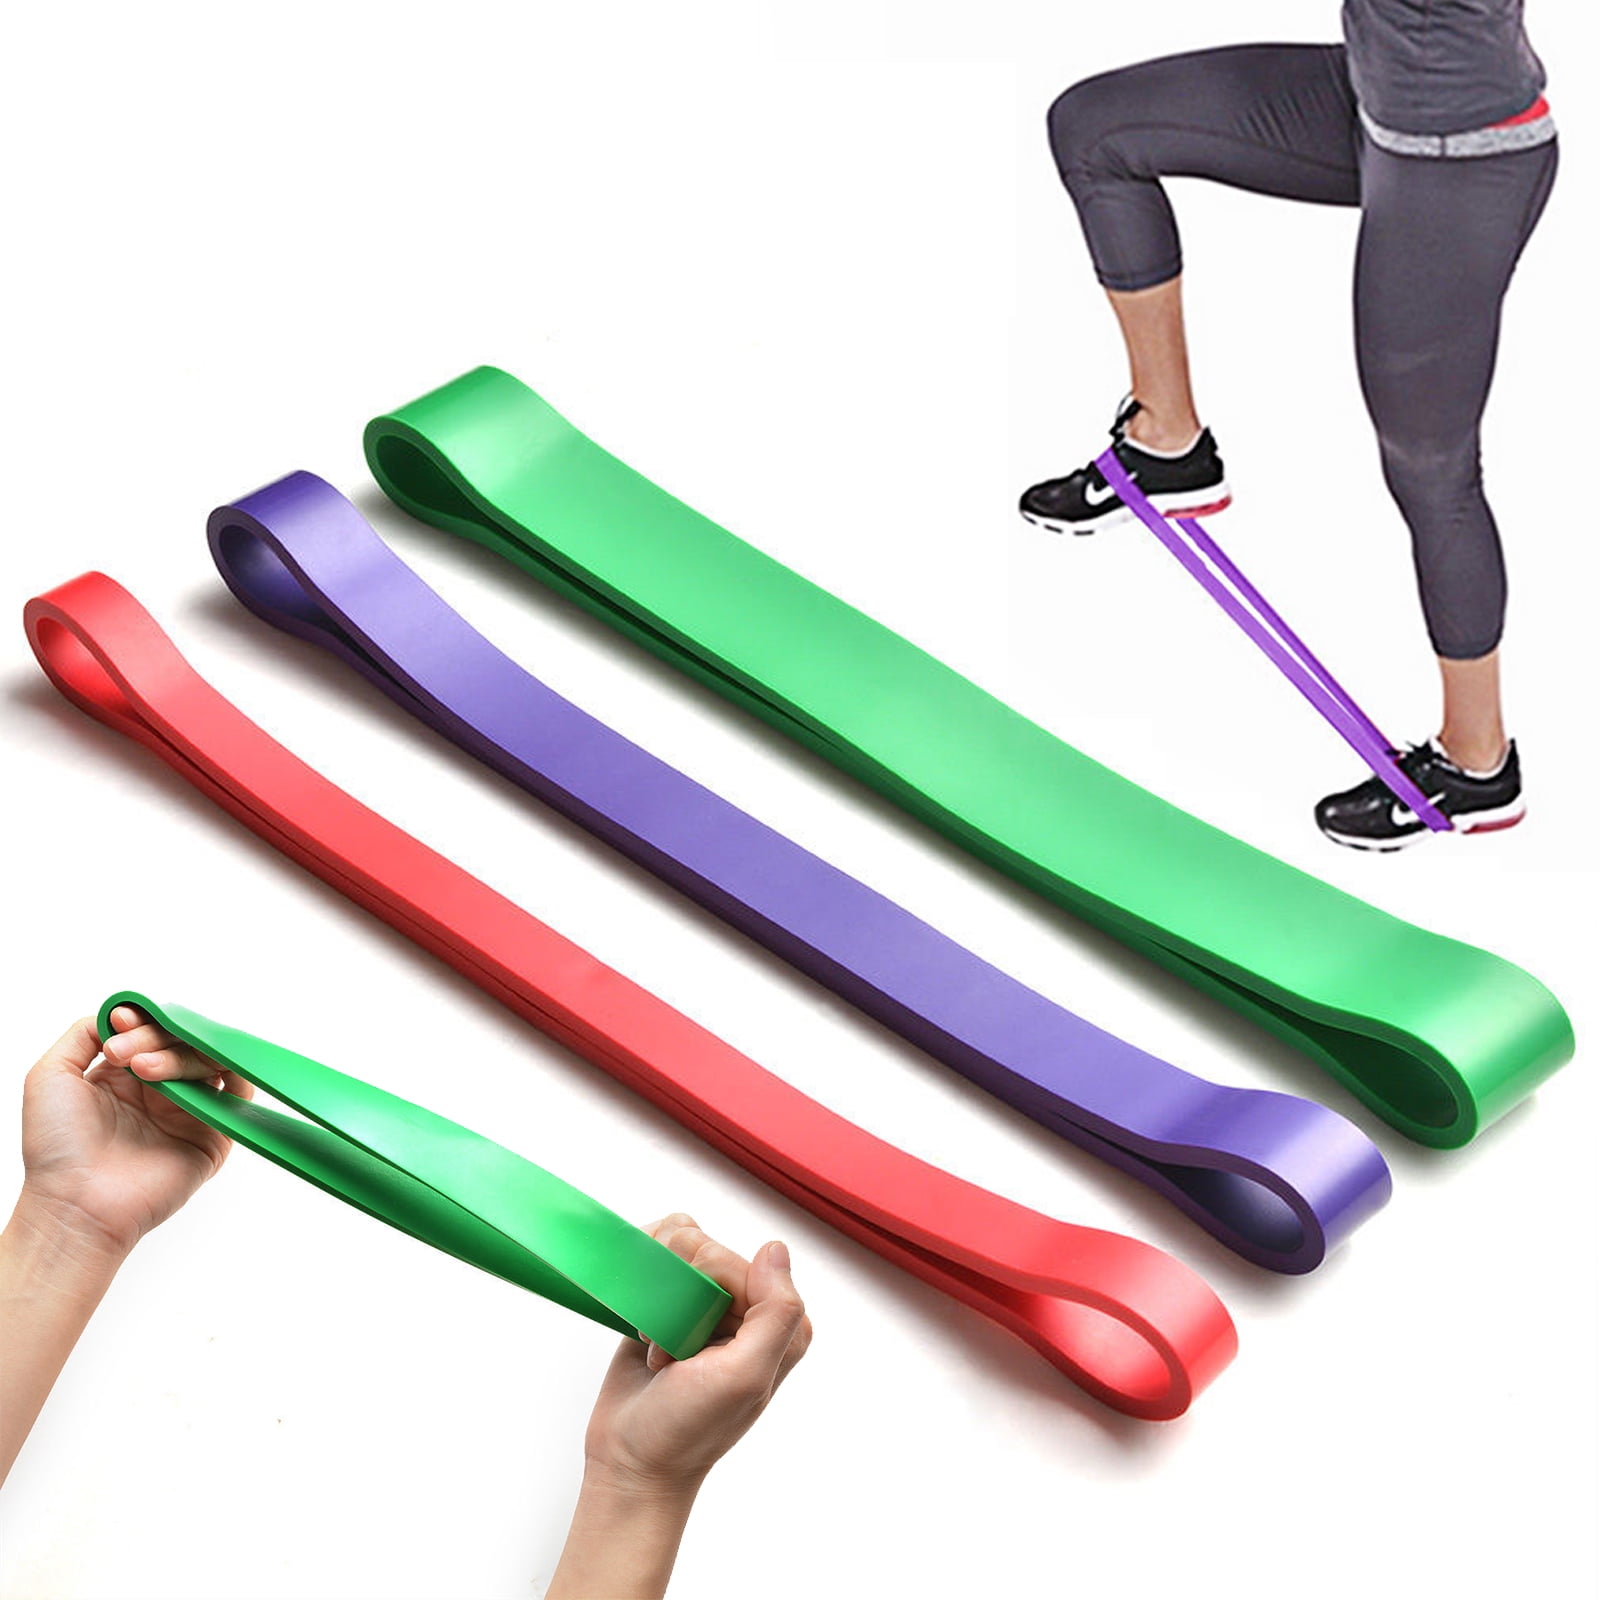 How Effective Are Resistance Bands?